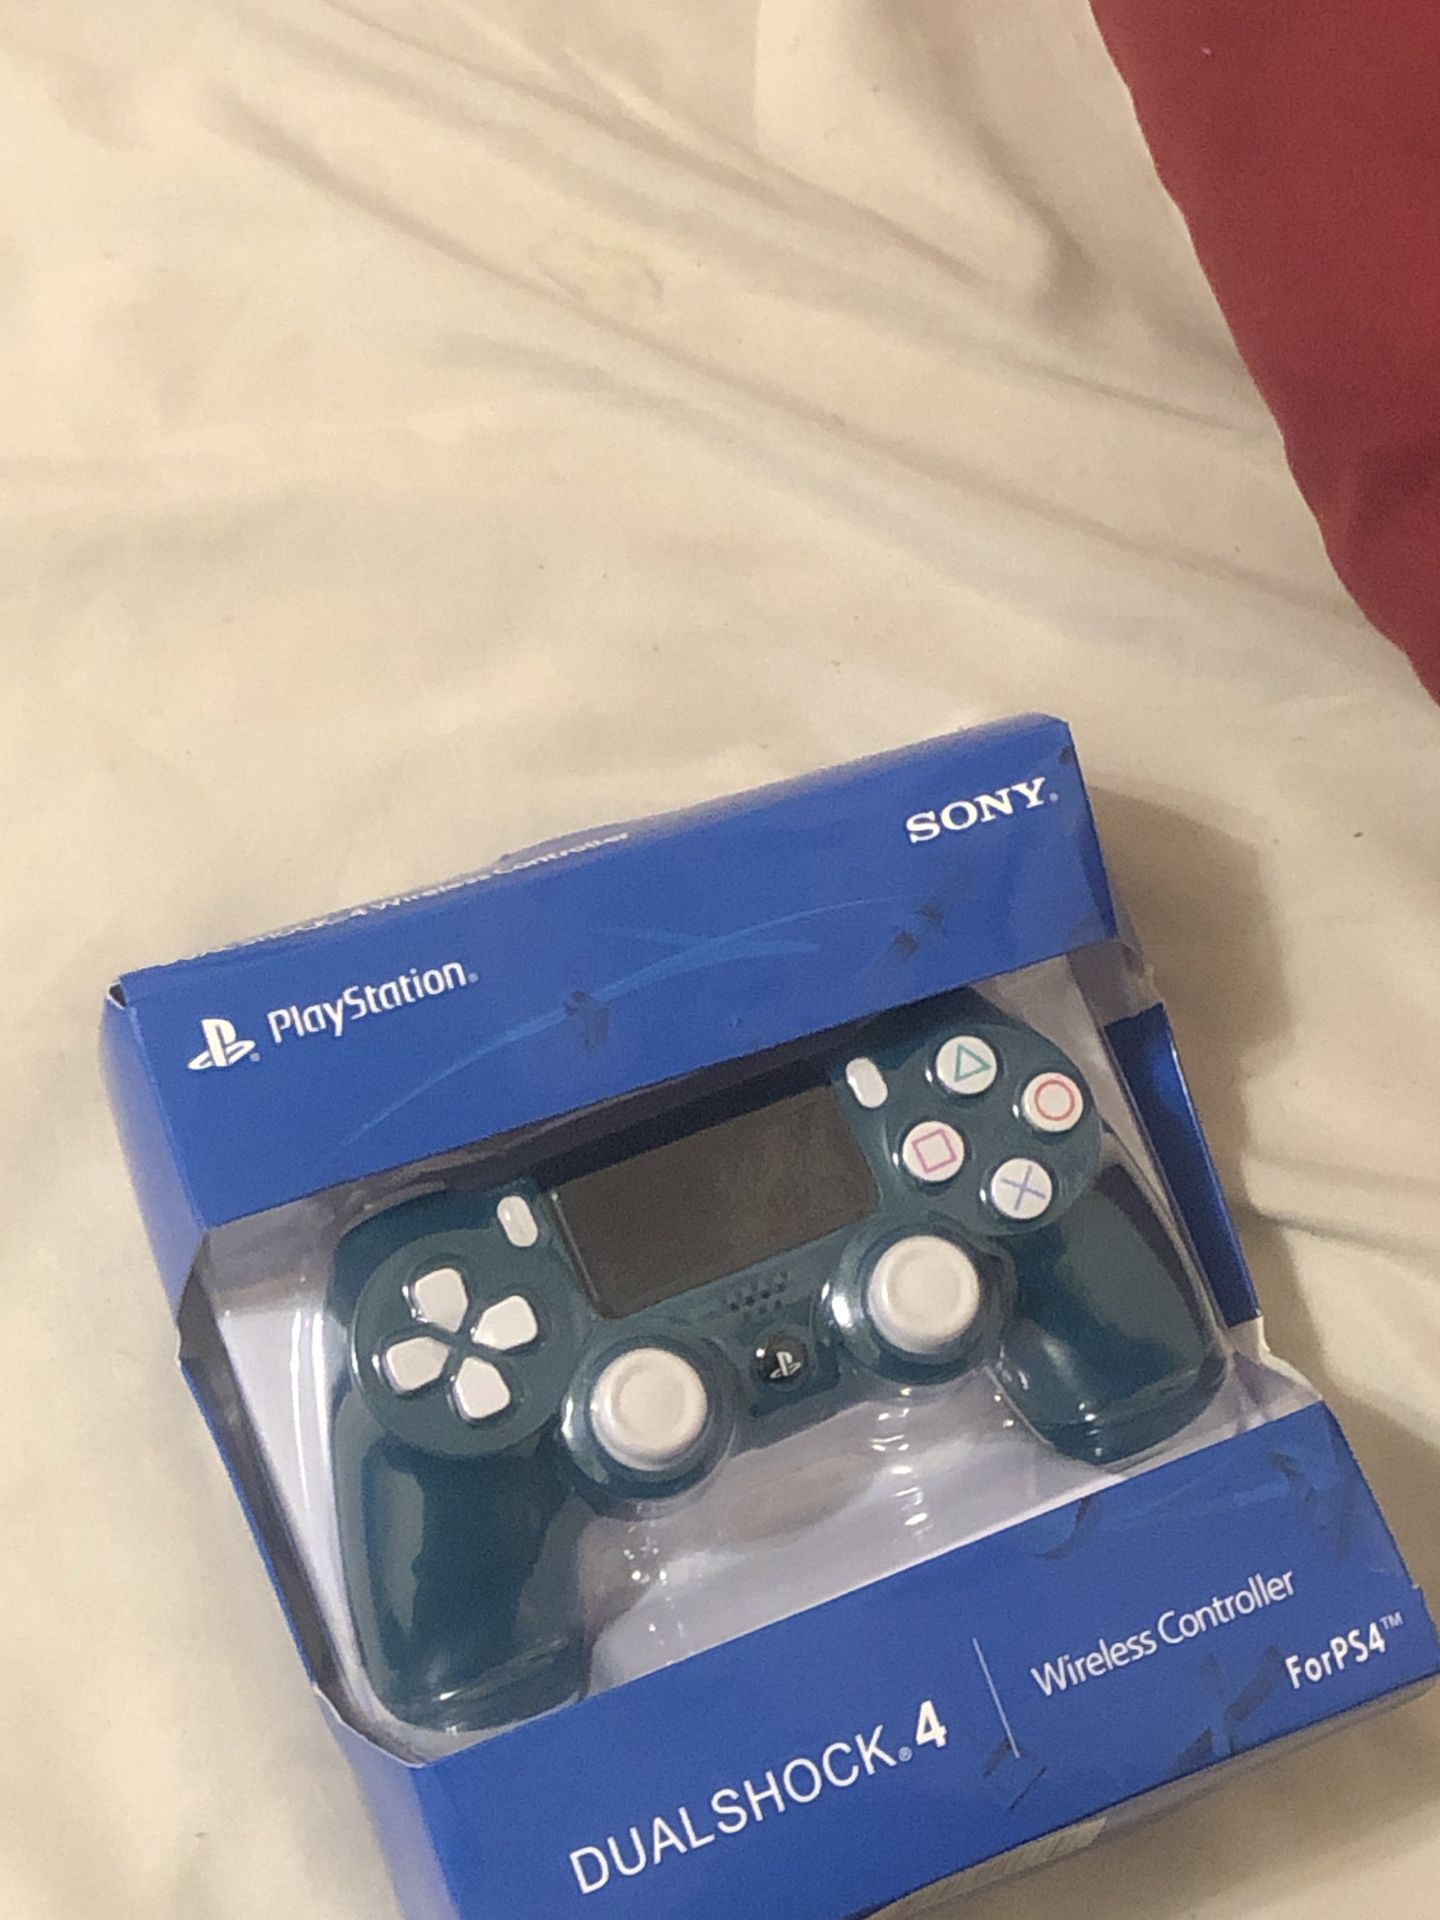 PS4 controller new